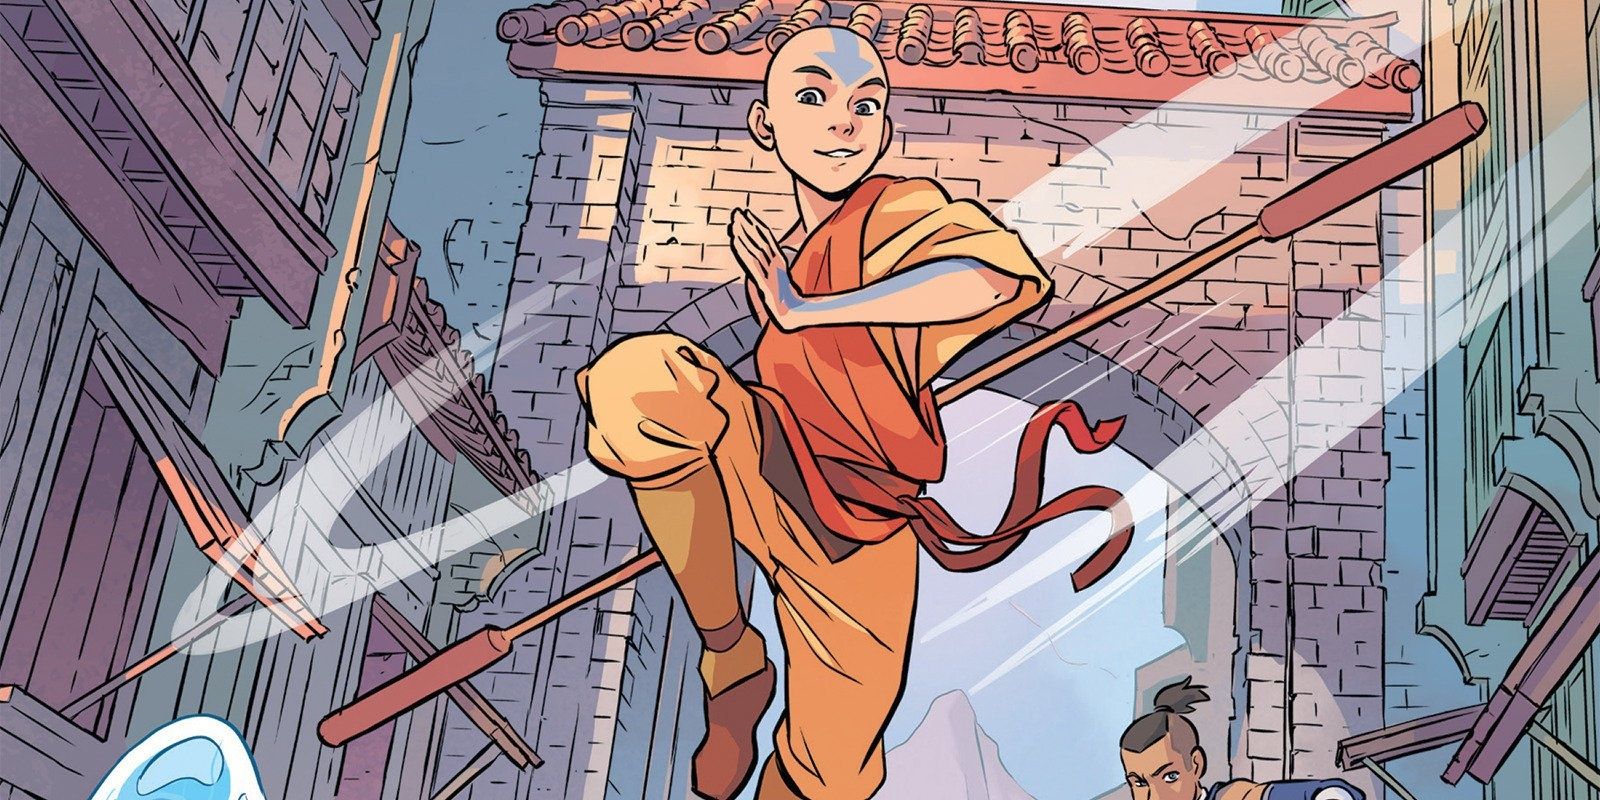 Aang jumping in mid air with his staff on the cover of Imbalance